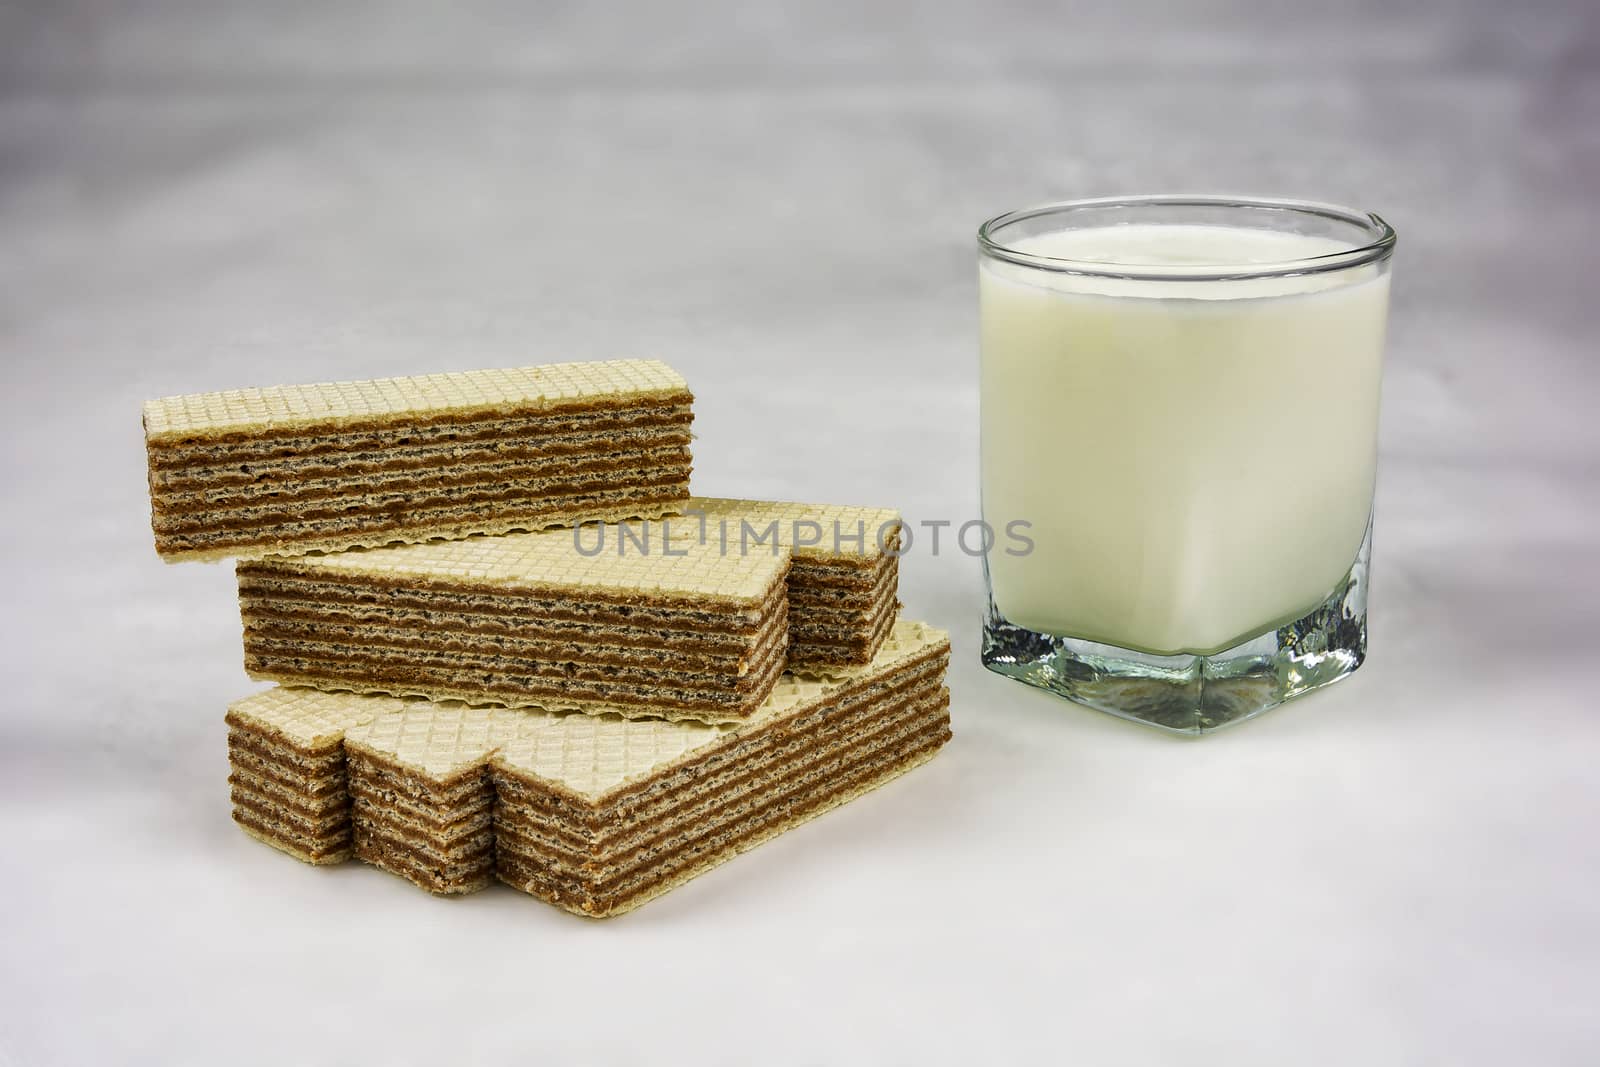 A glass of yogurt and wafers with chocolate filling on a gray background